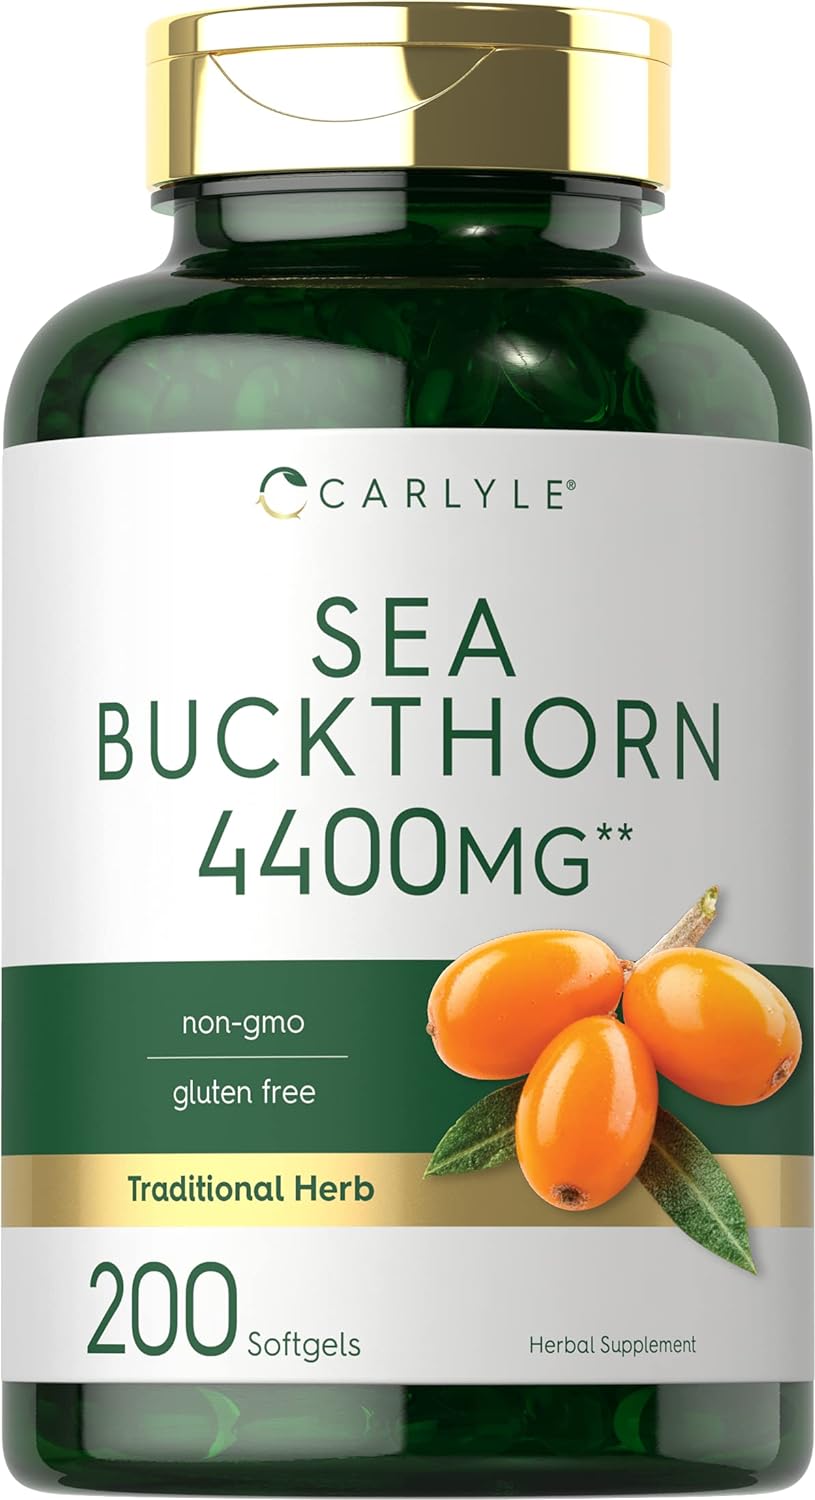 Carlyle Sea Buckthorn Oil Capsules 4400mg | 200 Softgels | Non-GMO, Gluten Free | Sea Buckthorn Berry Oil Supplement